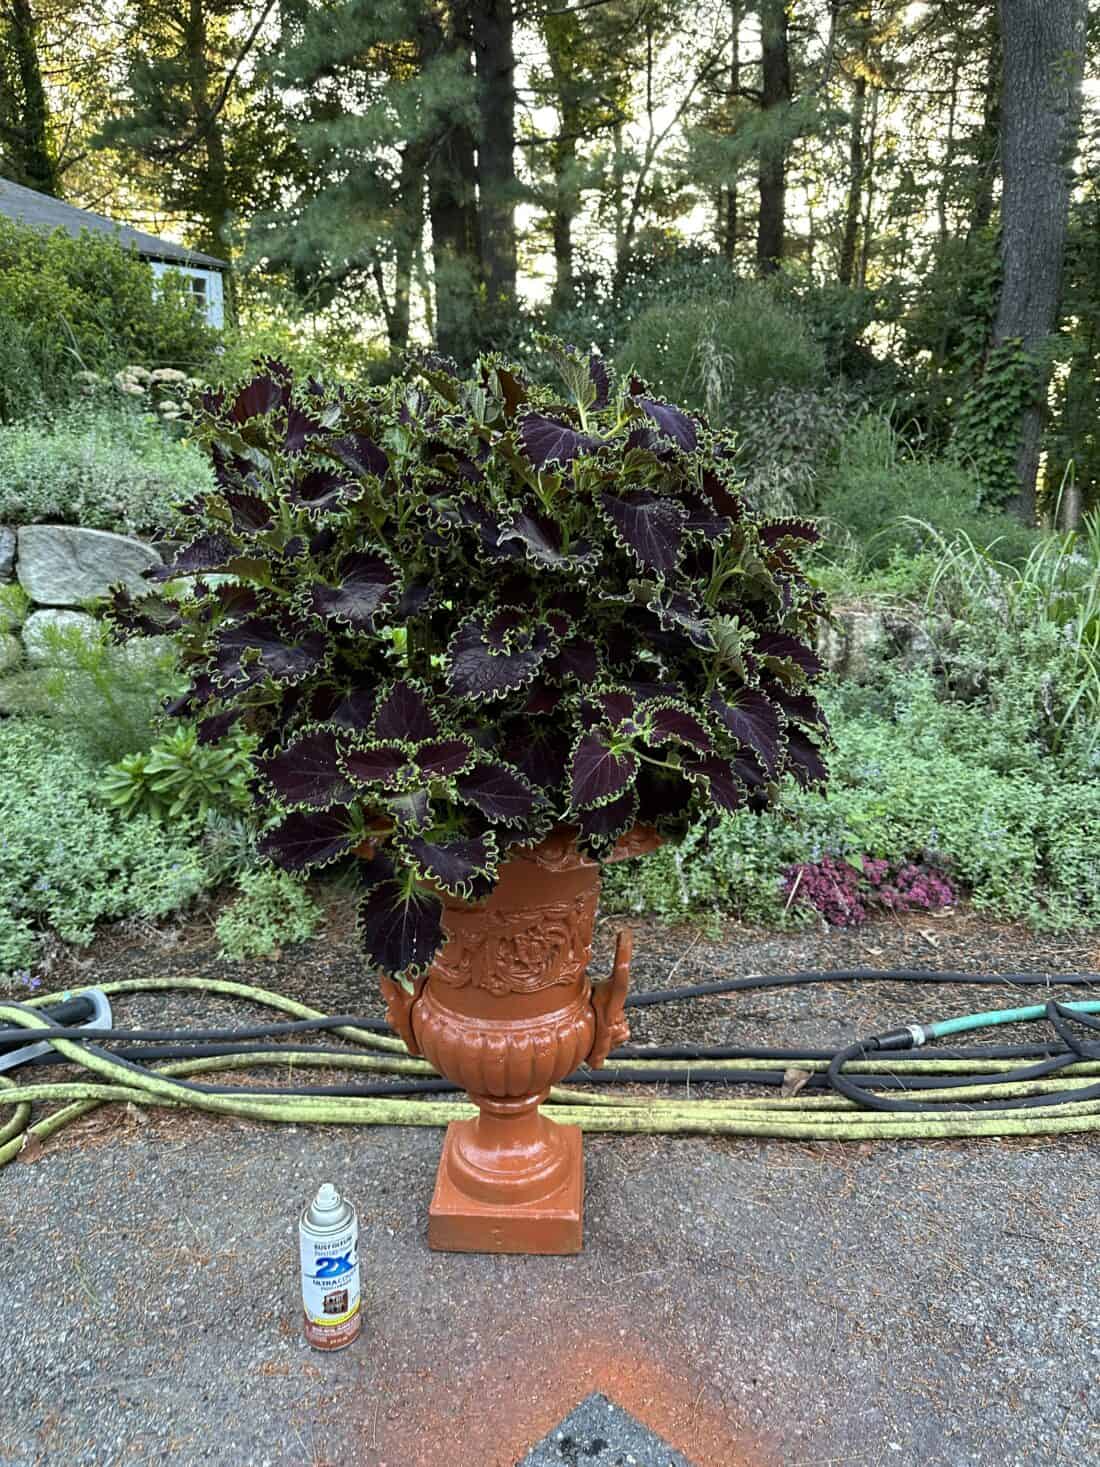 A large, lush coleus plant in a terracotta pot outdoors with a bottle of insect repellent on the ground to the left and garden hoses in the background.